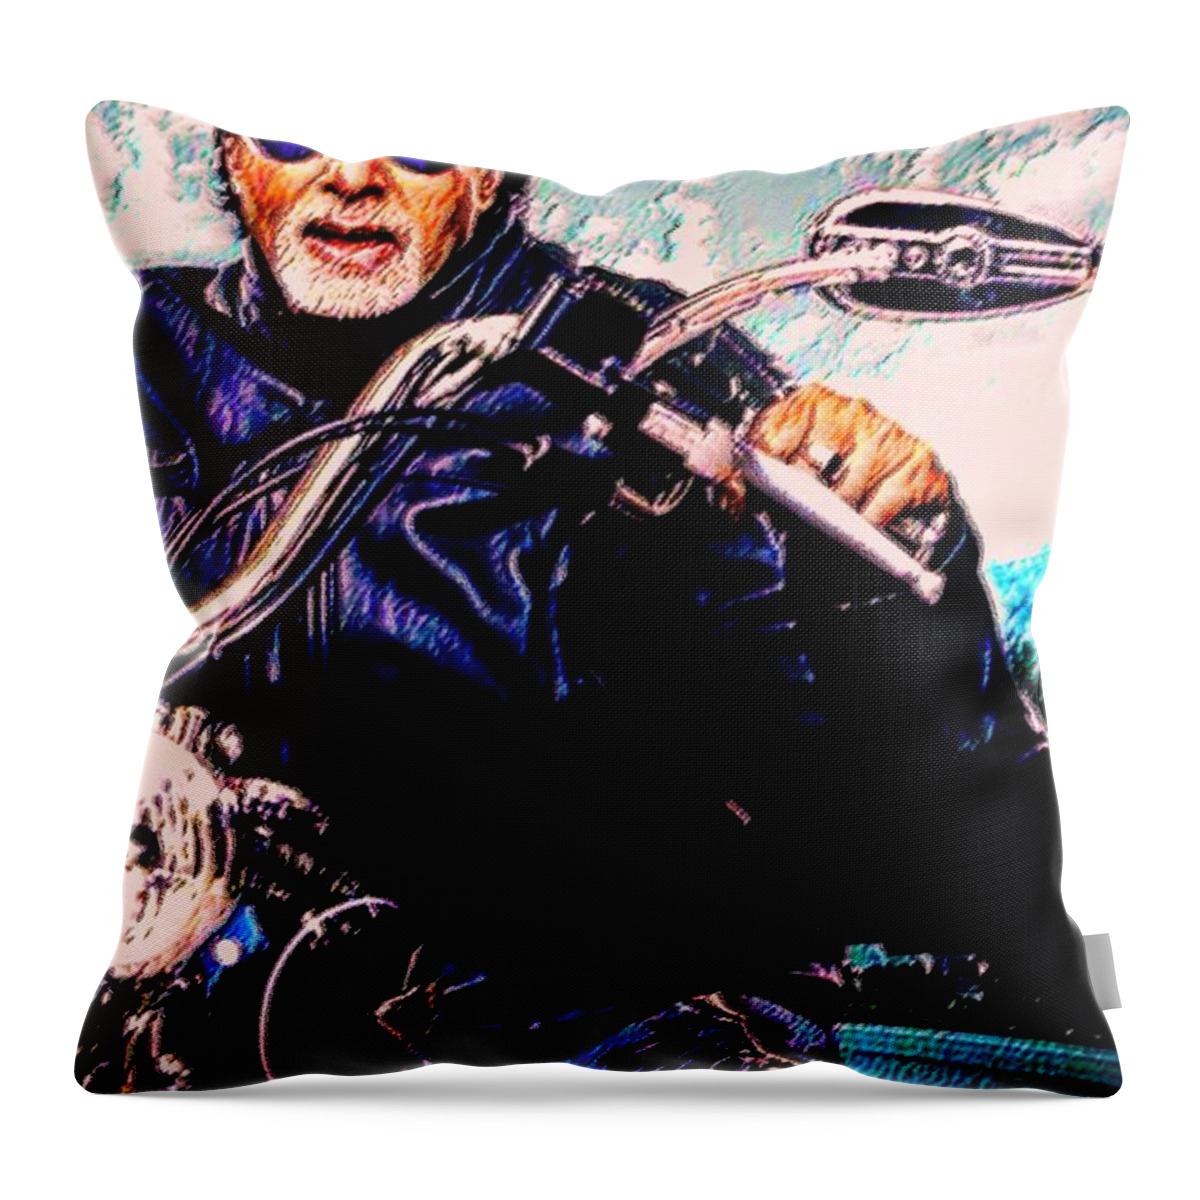 Amitabh Bachchan Throw Pillow featuring the painting Amitabh Bachchan - Living Legend by Piety Dsilva